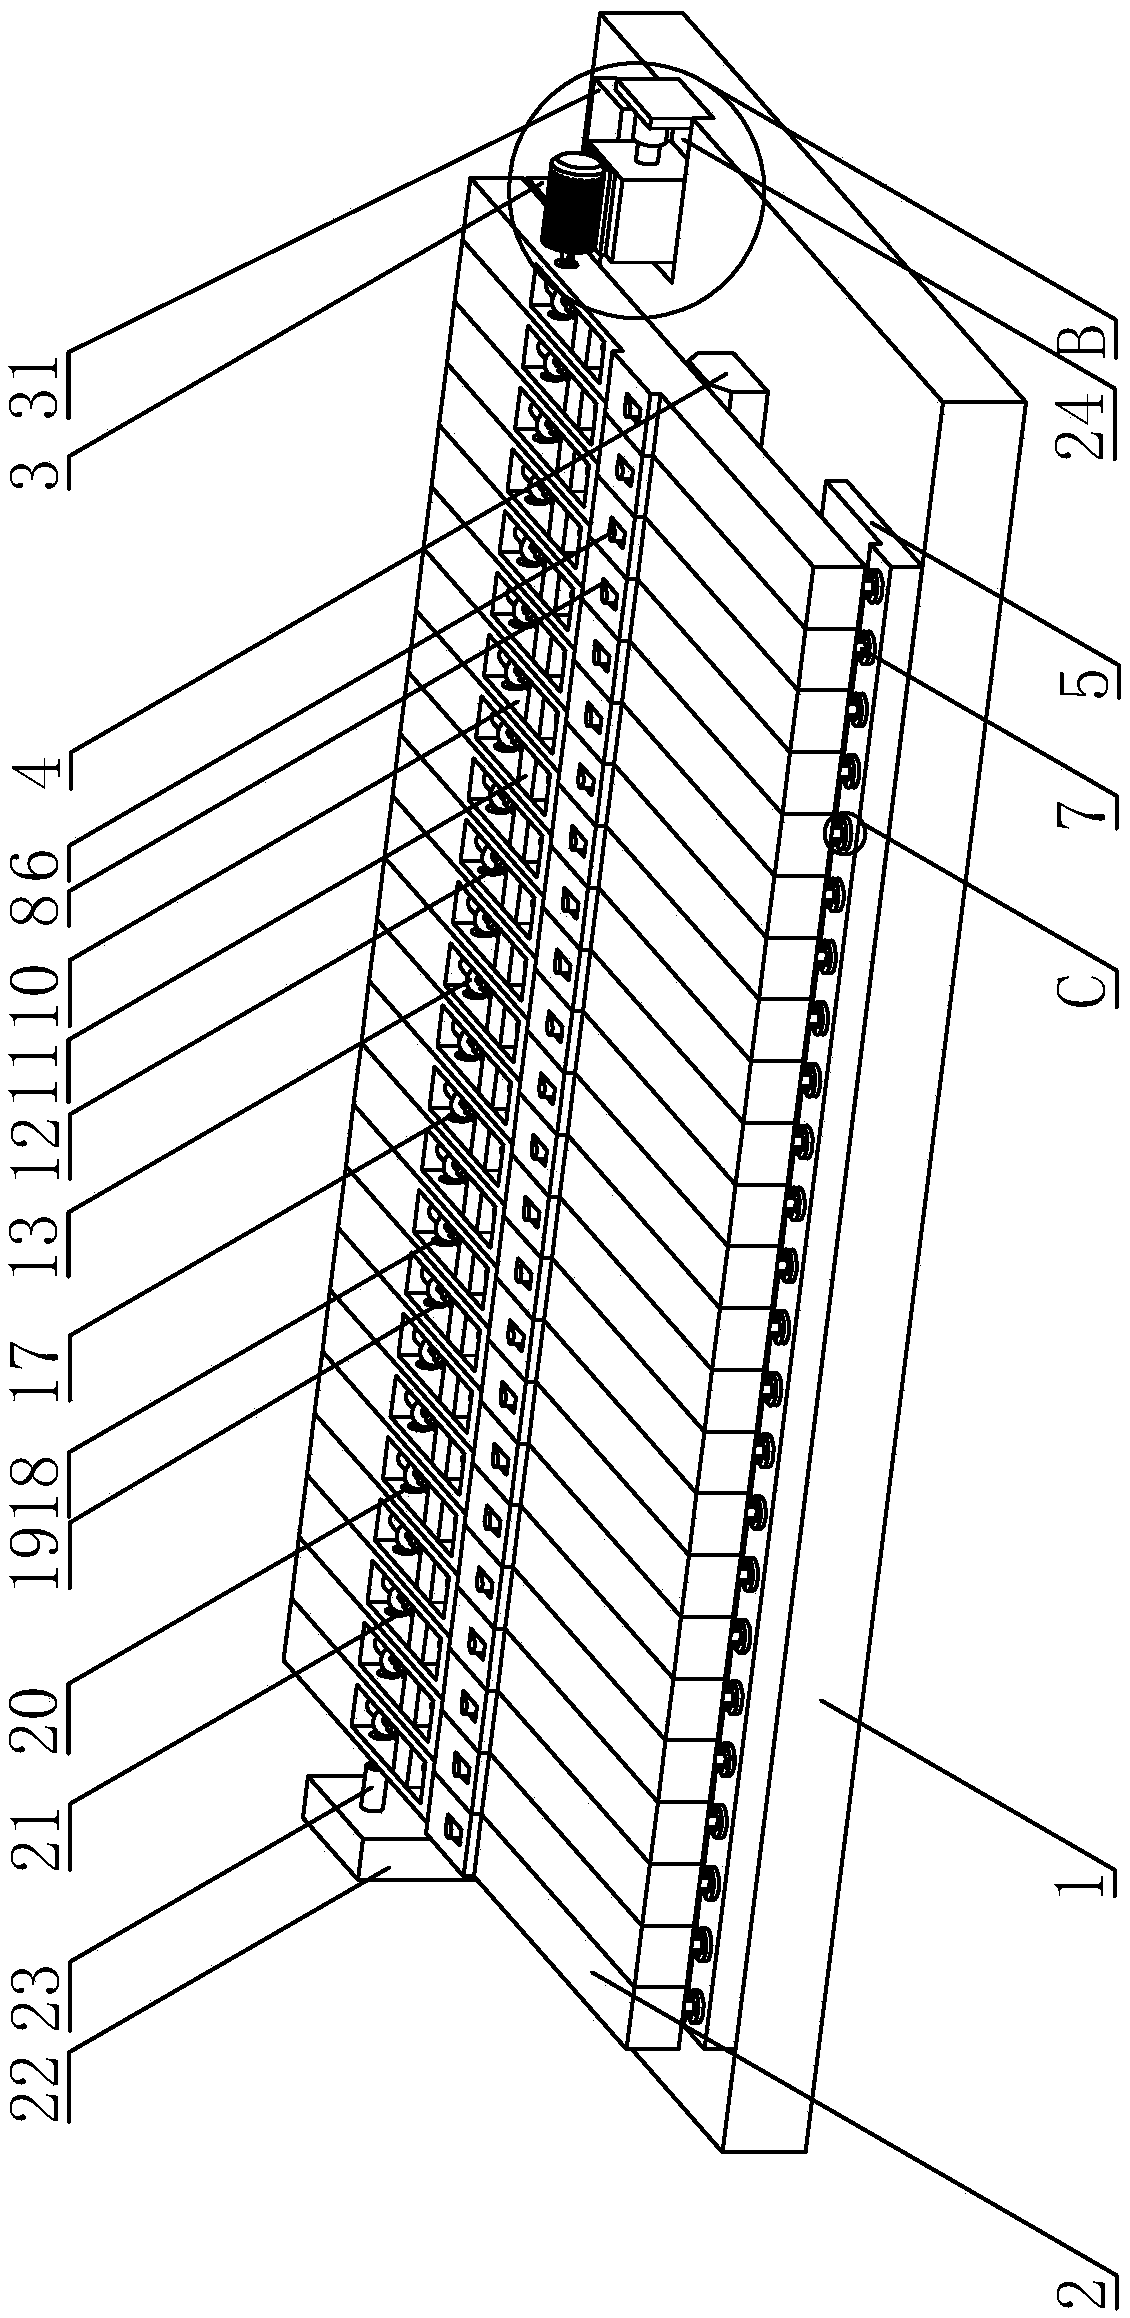 Piano key playing force adjusting device